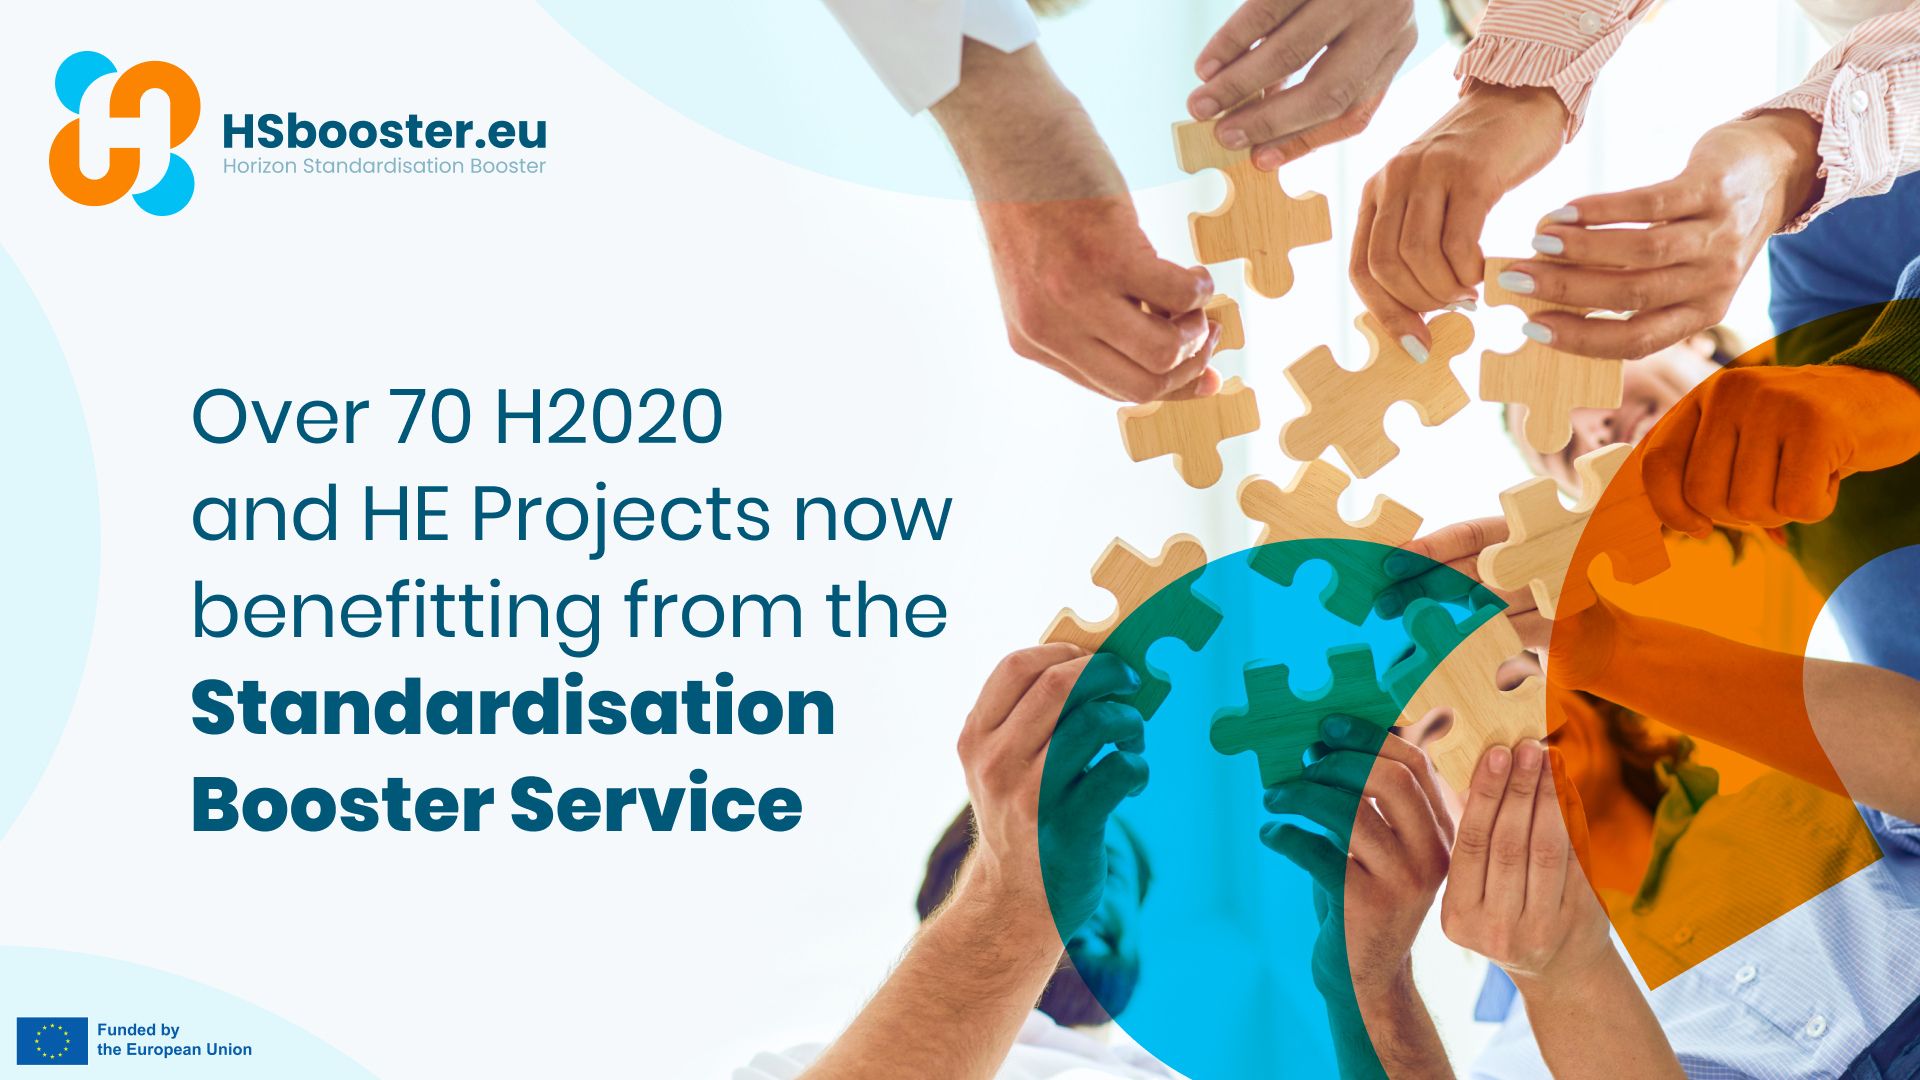 Over 70 H2020 and HE Projects now benefitting from the Standardisation Booster Services 